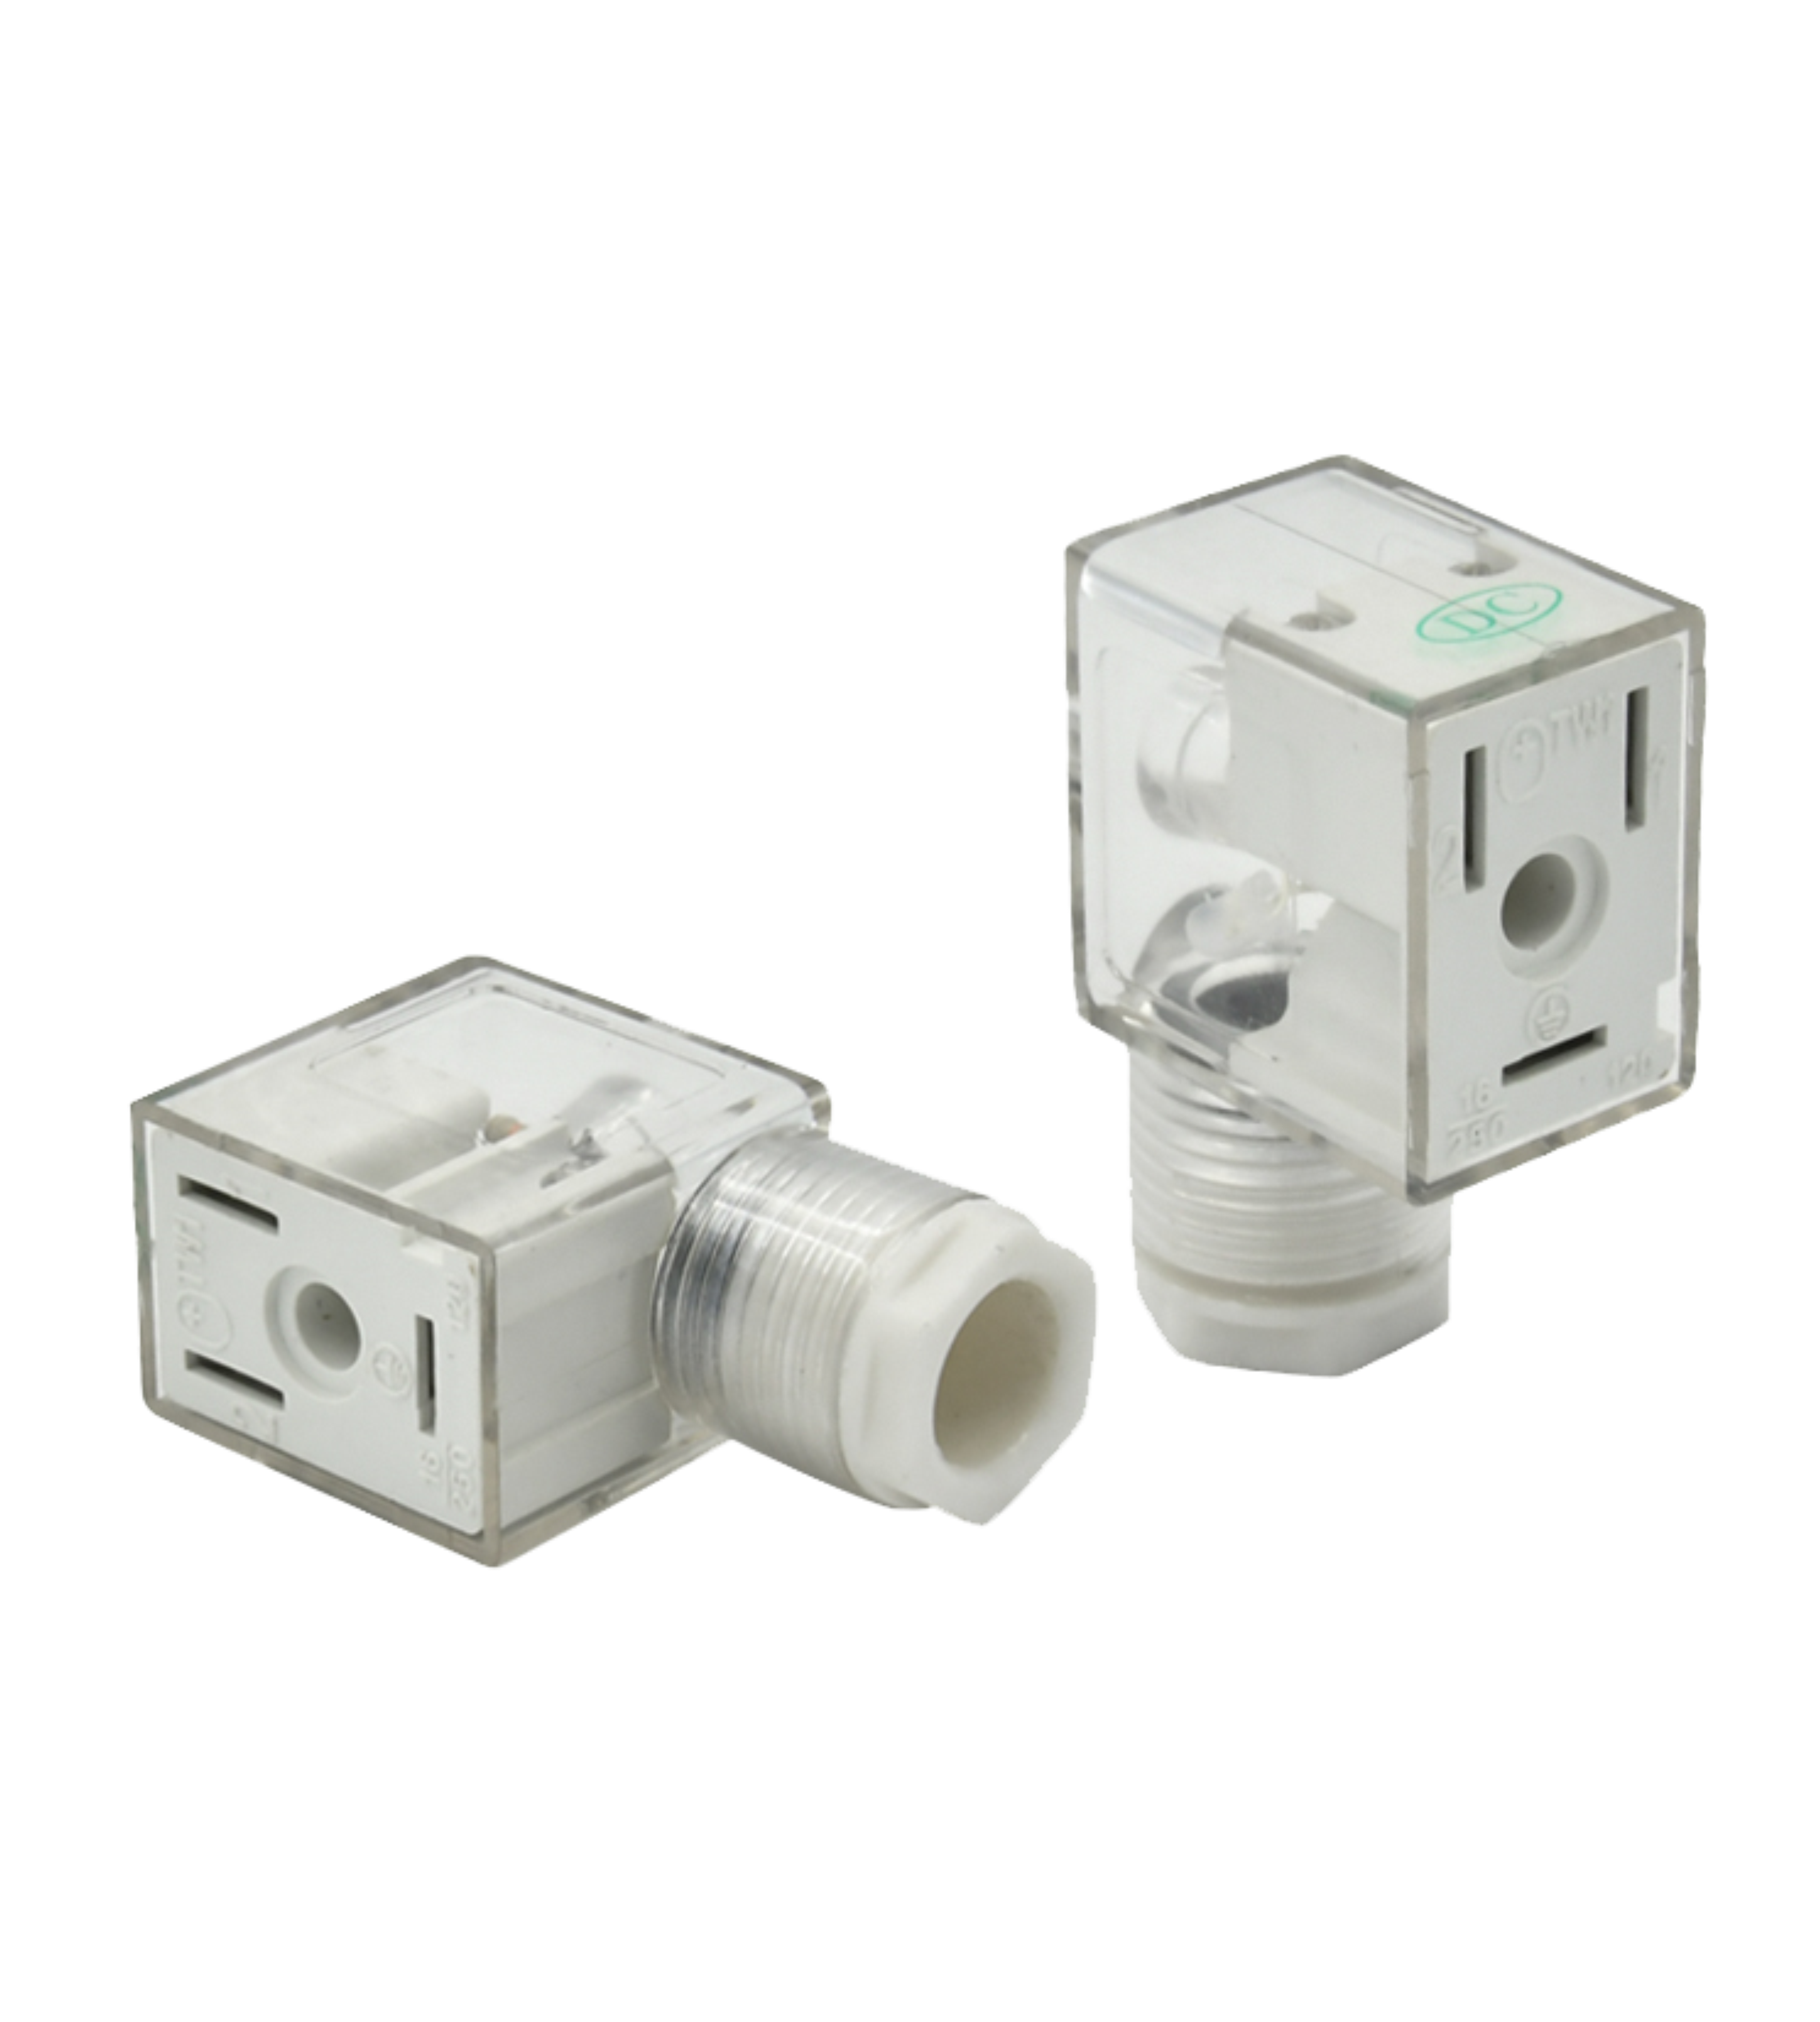 Enhance Your Industrial Automation with Rigoal's Innovative Solenoid Valve Connectors